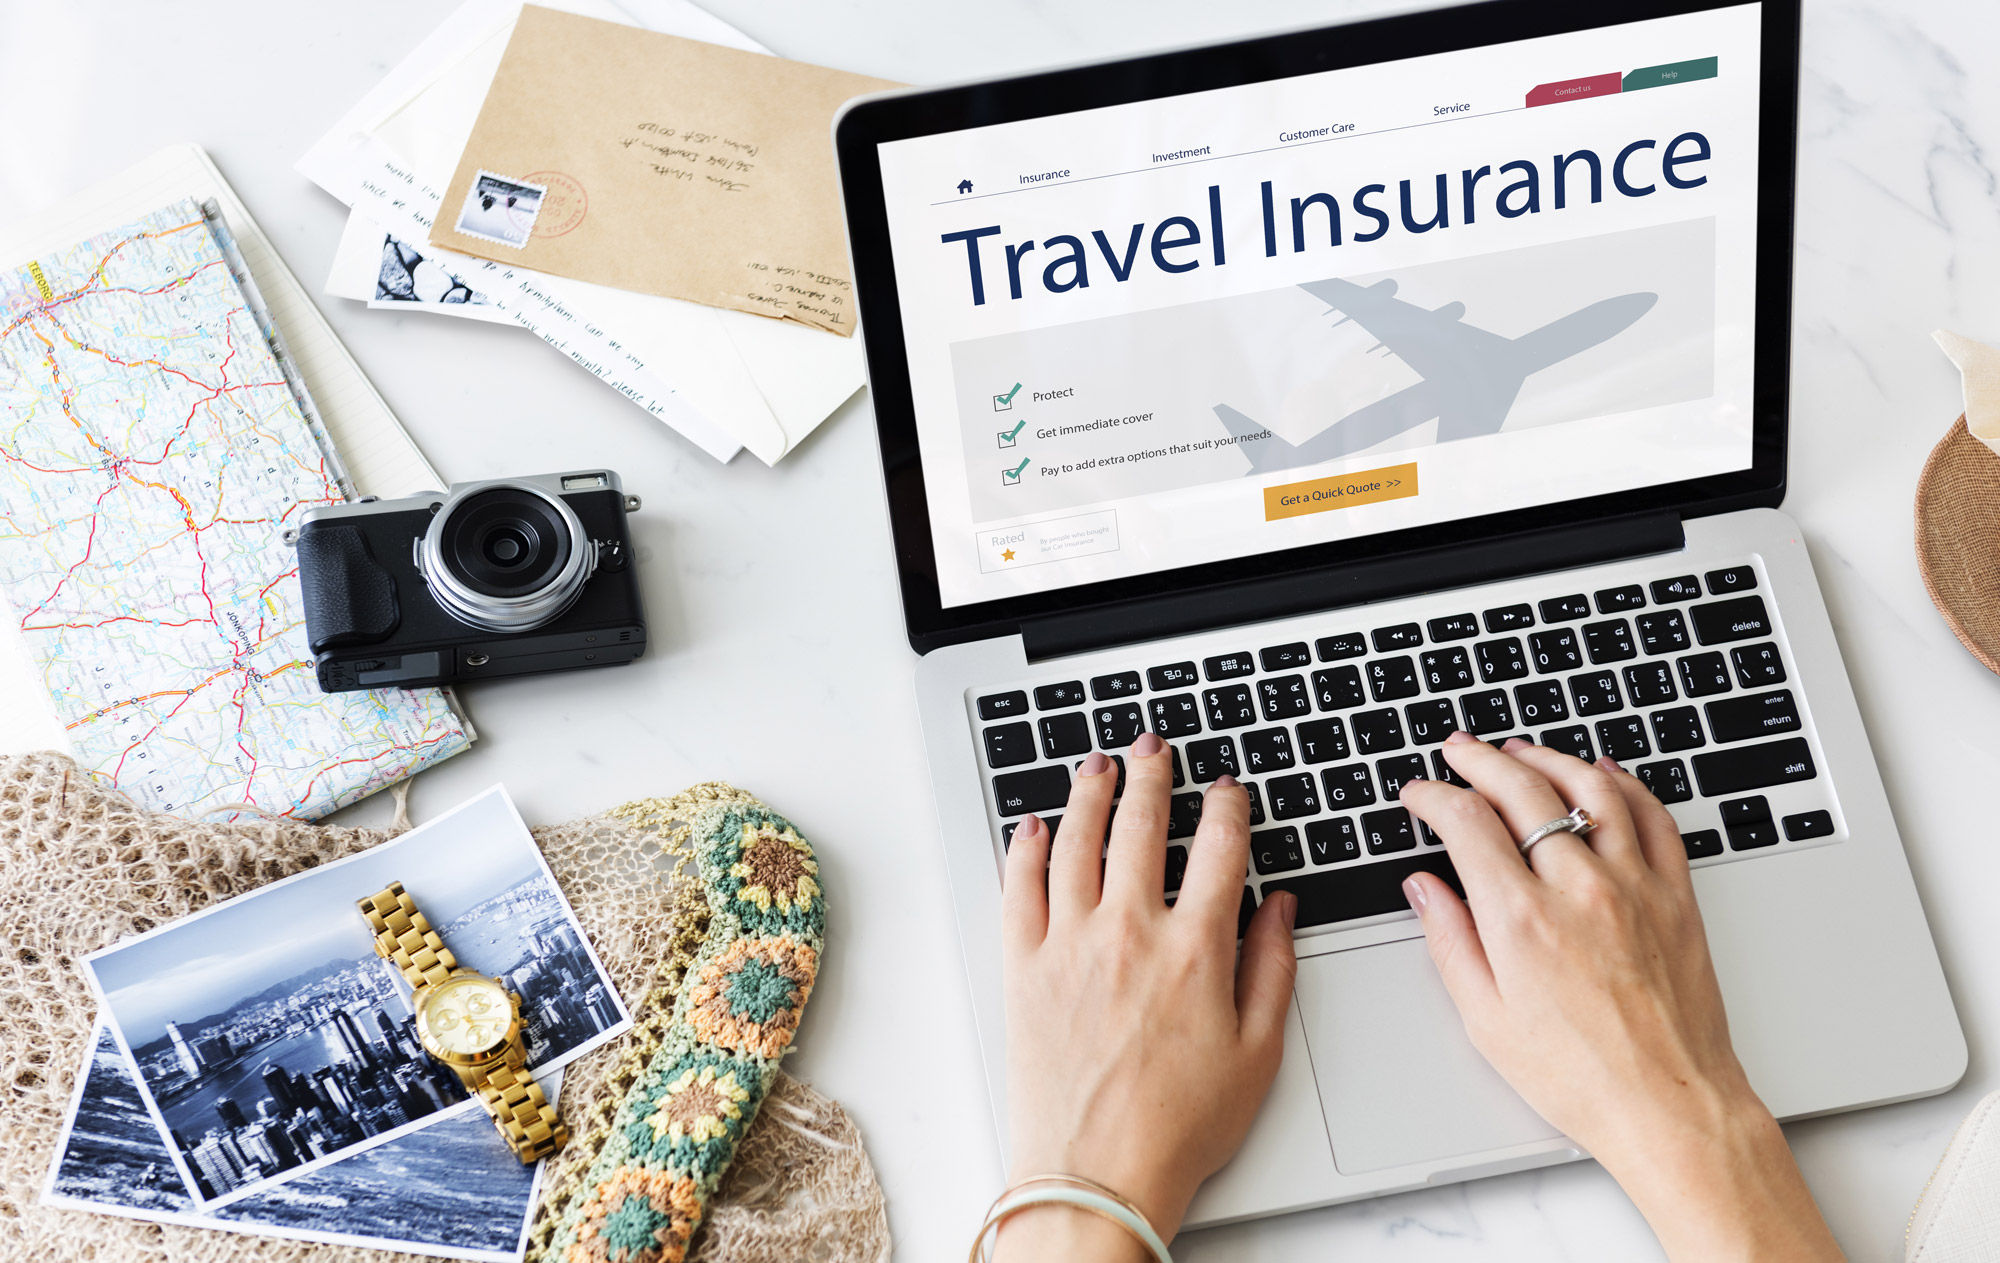 Travel Insurance Benefits And Its Exclusions